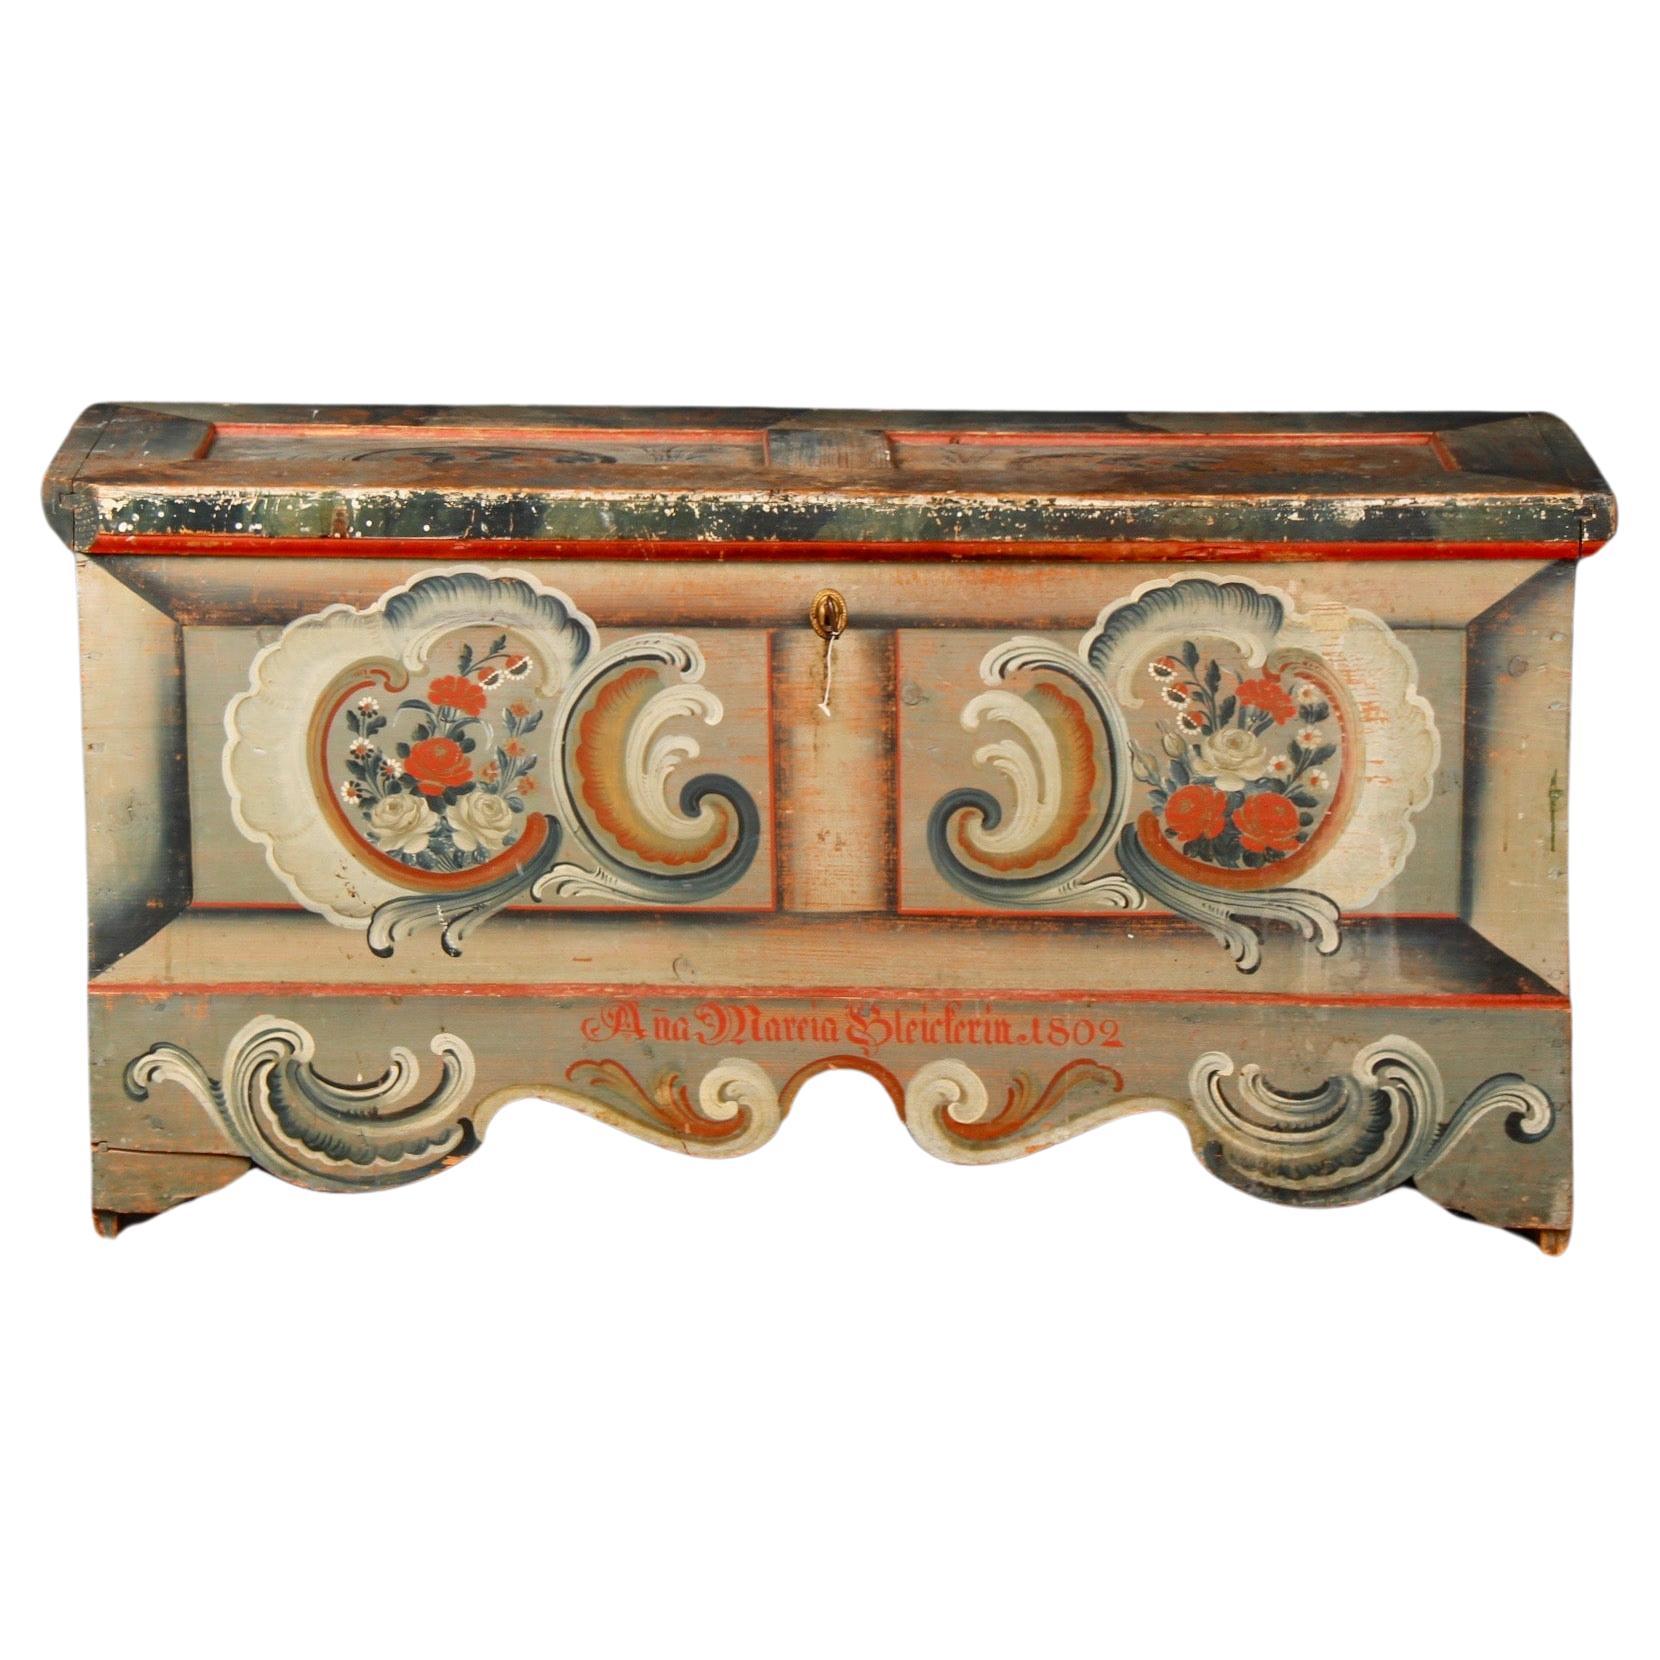 Swiss alp painted trunk dated 1808